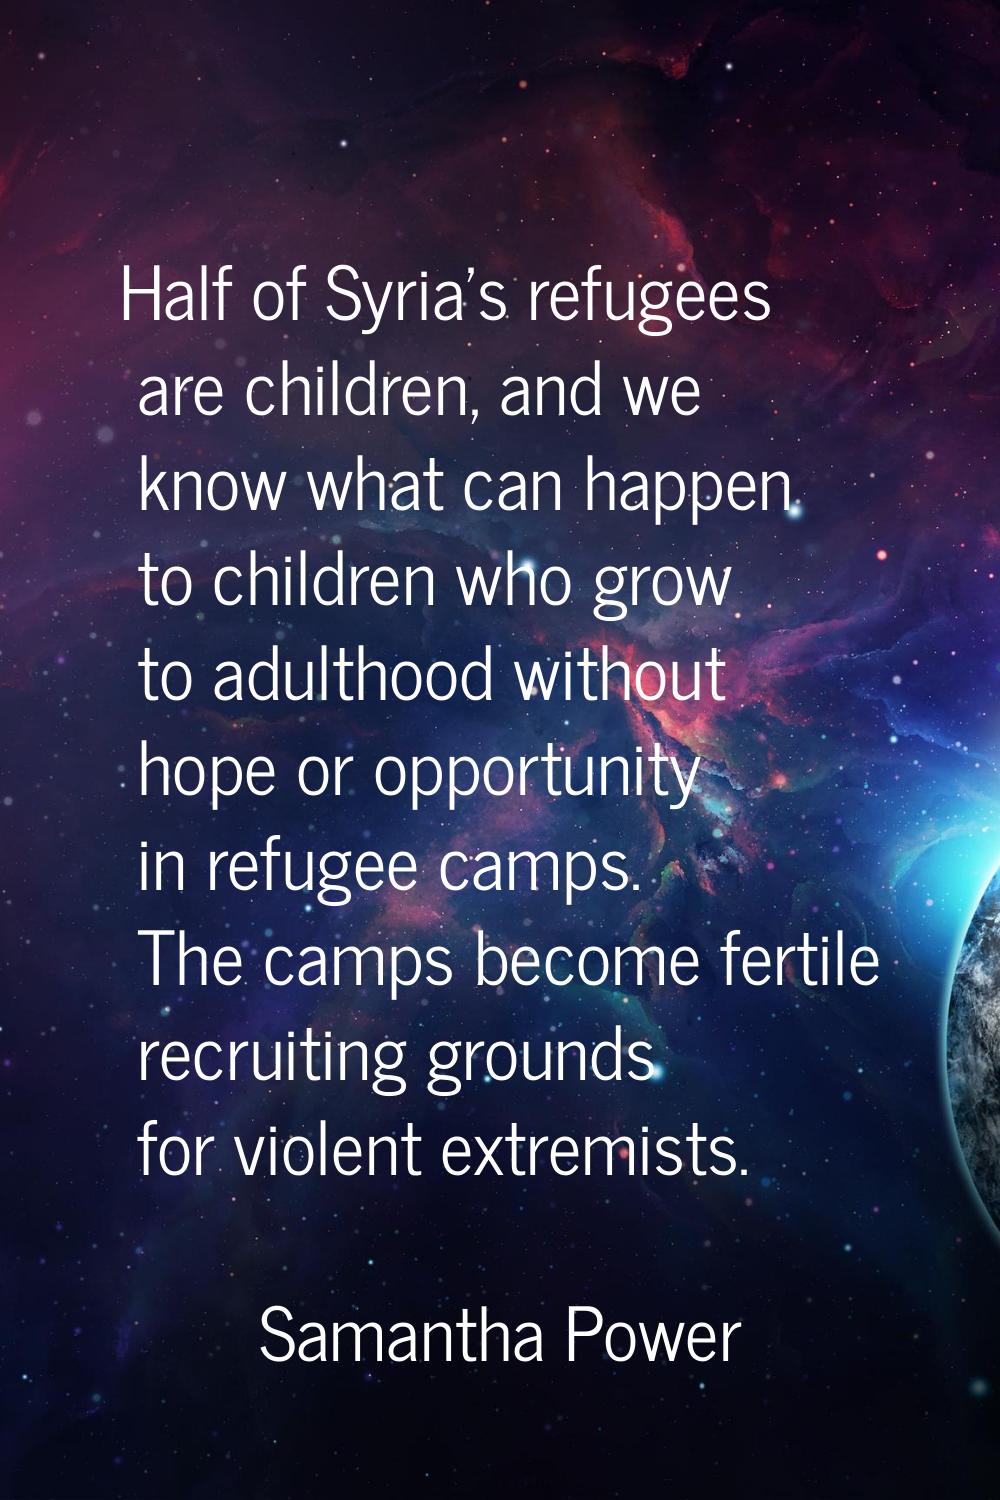 Half of Syria's refugees are children, and we know what can happen to children who grow to adulthoo